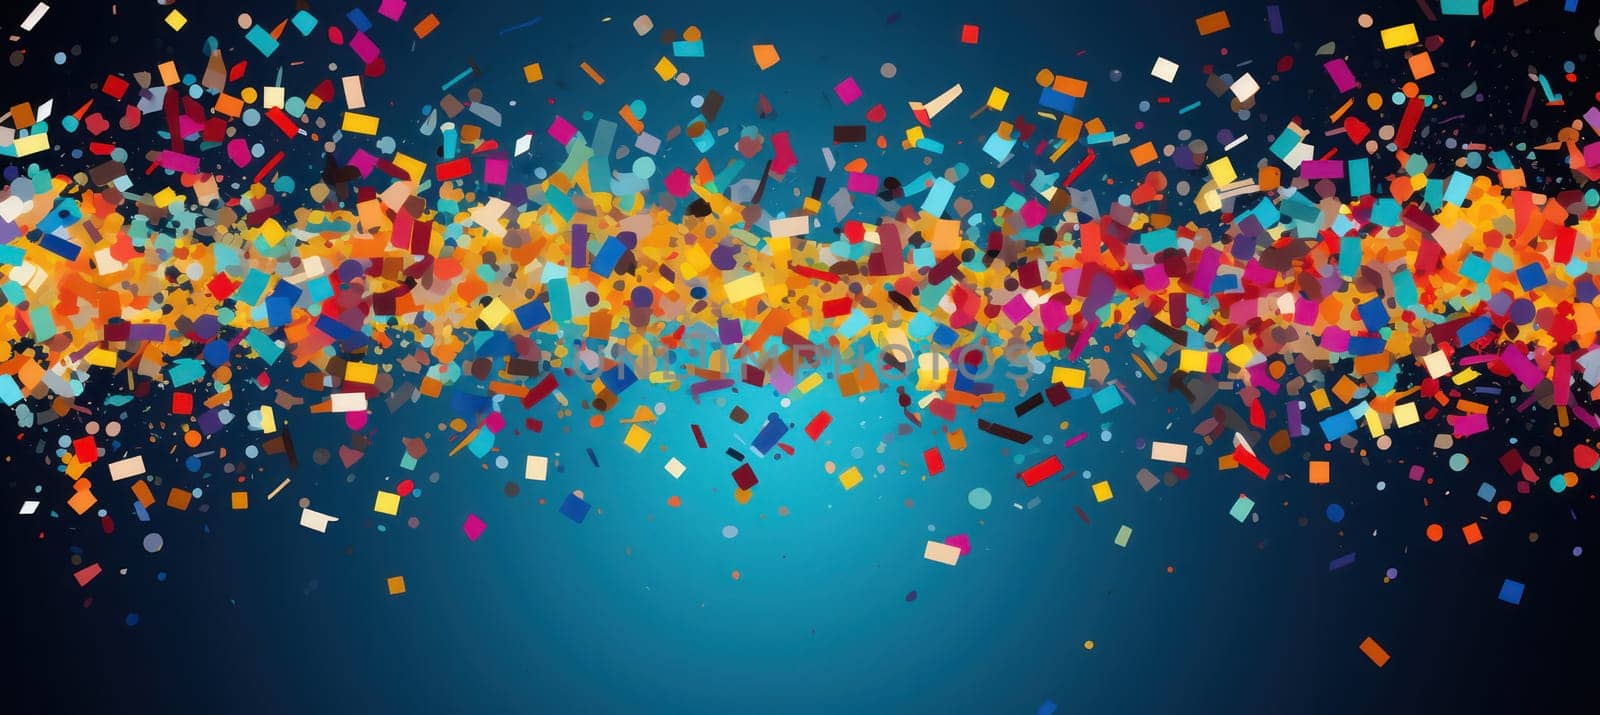 Colorful Confetti Celebration: Bright, Happy, and Fun Abstract Illustration on Blue Background